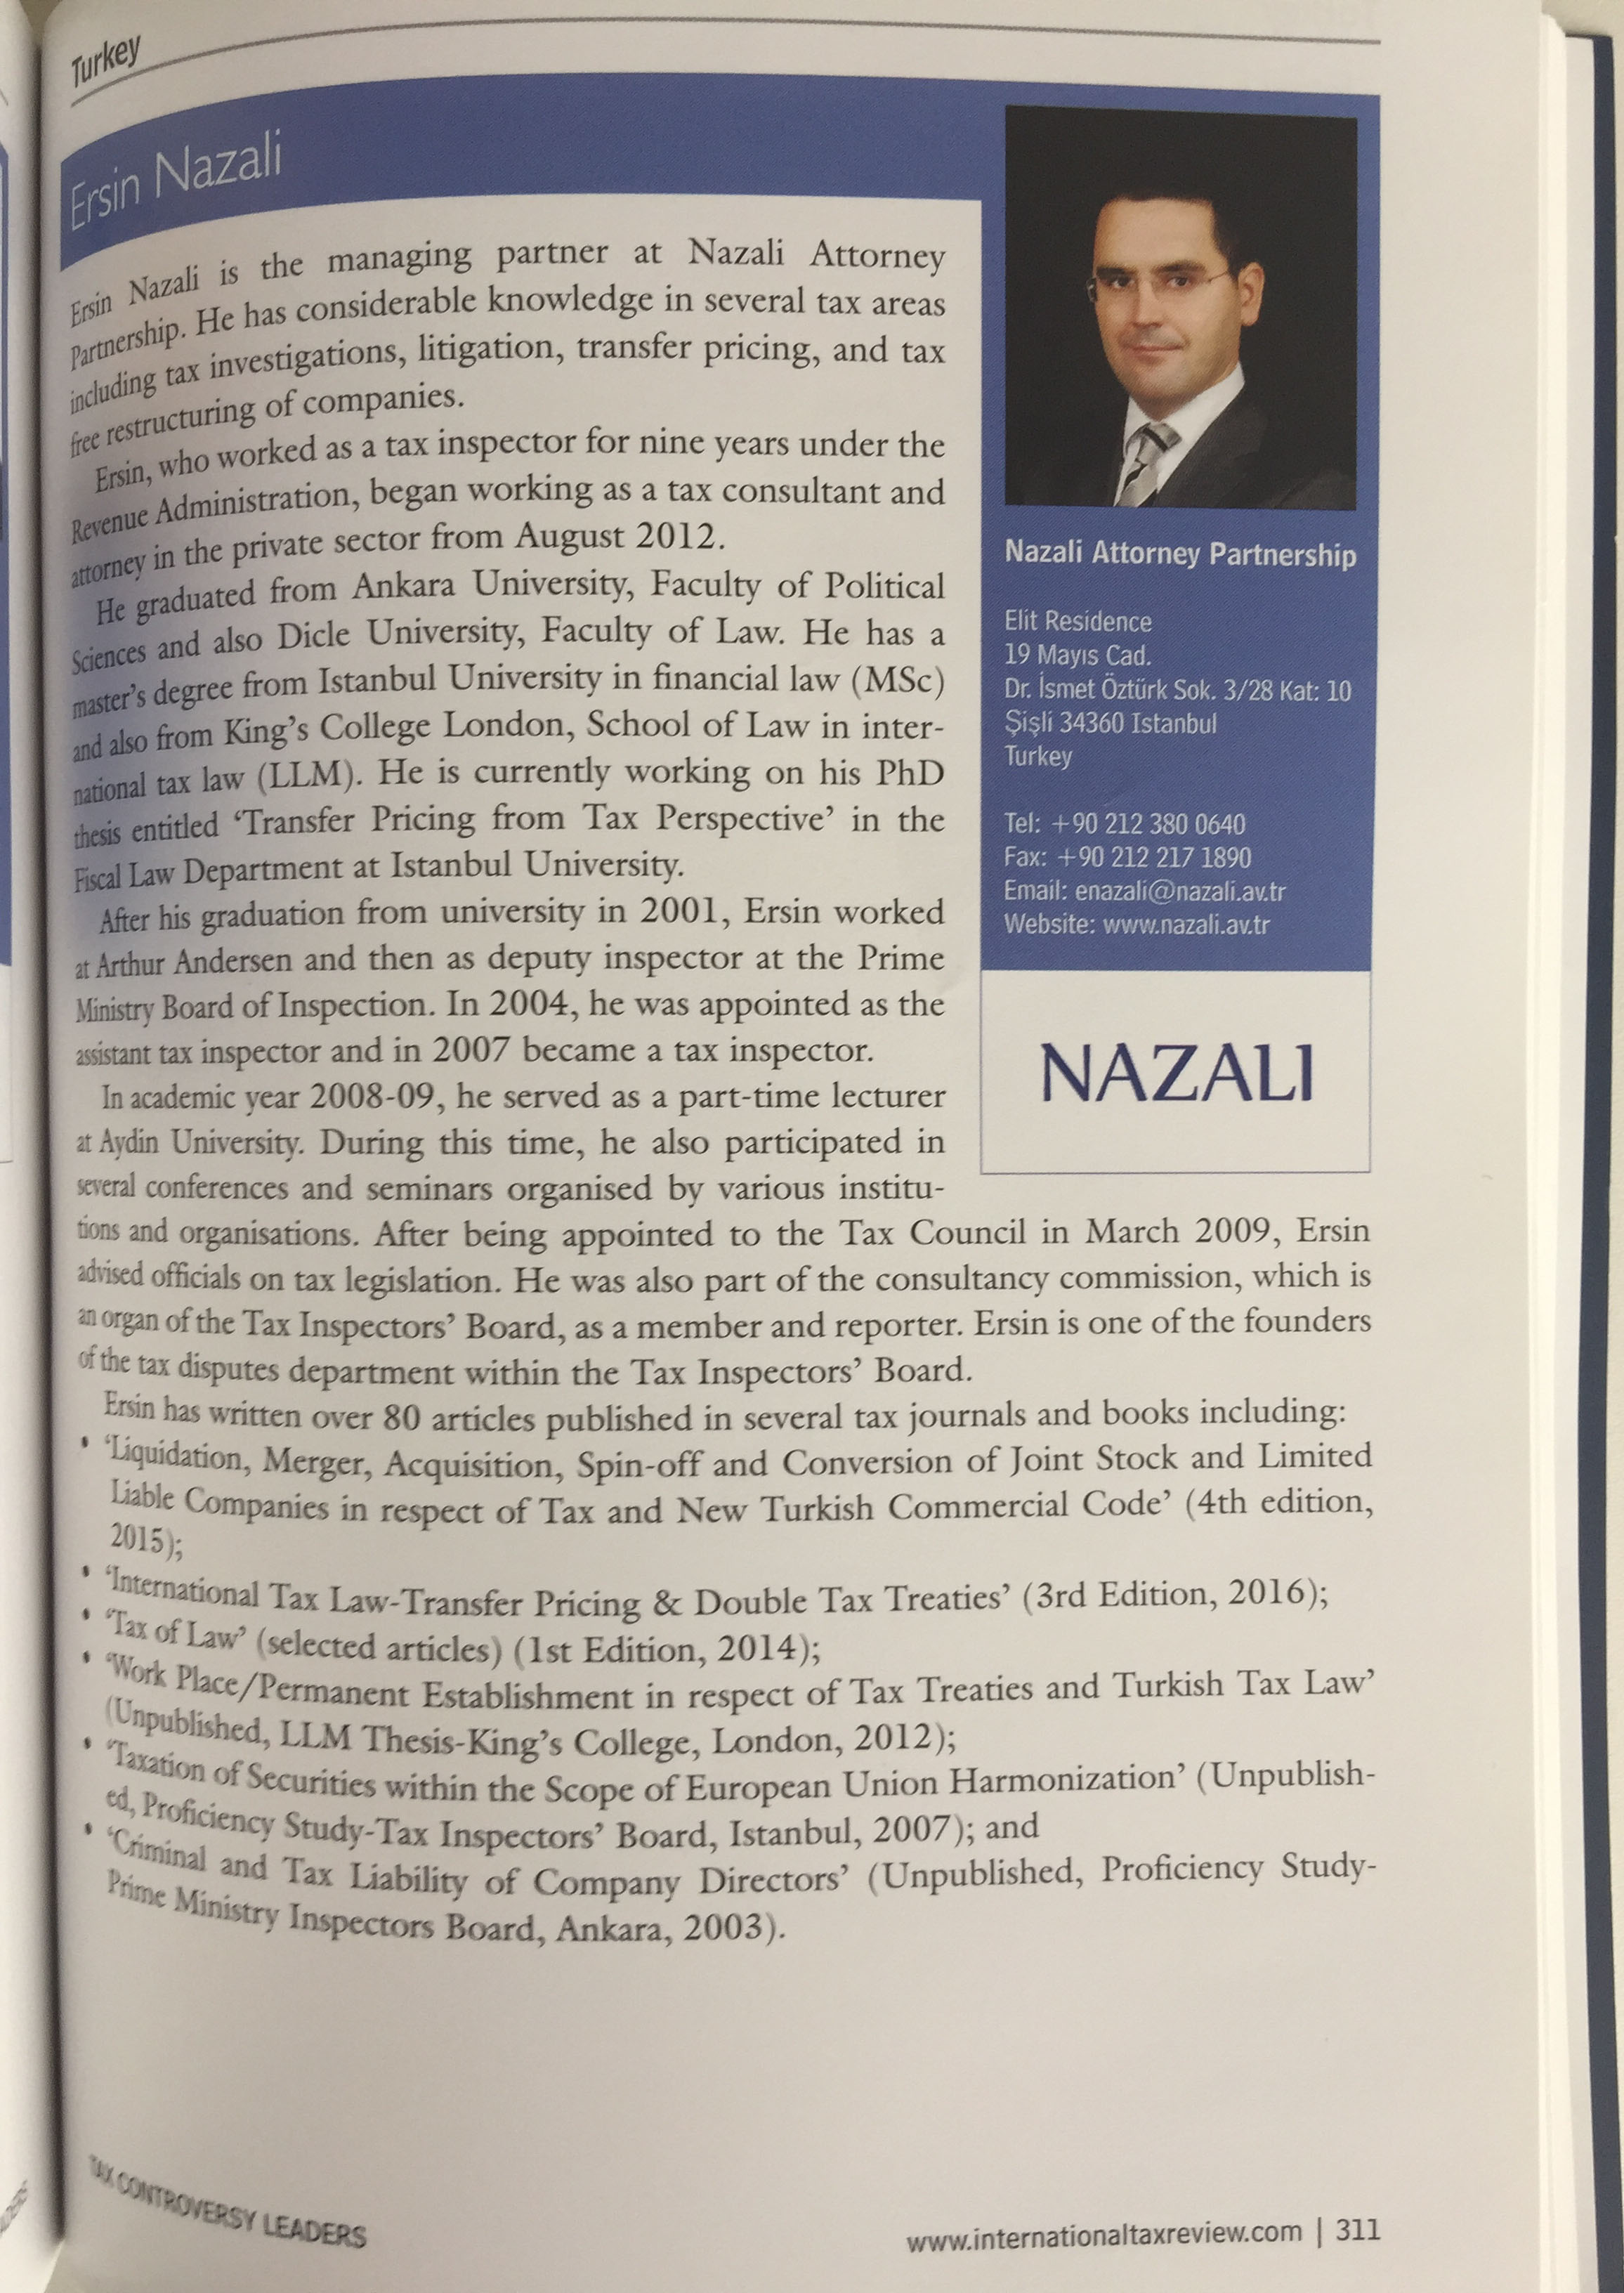 Our managing partner Ersin Nazalı has been selected leading Tax lawyer-counselor by International Tax Review